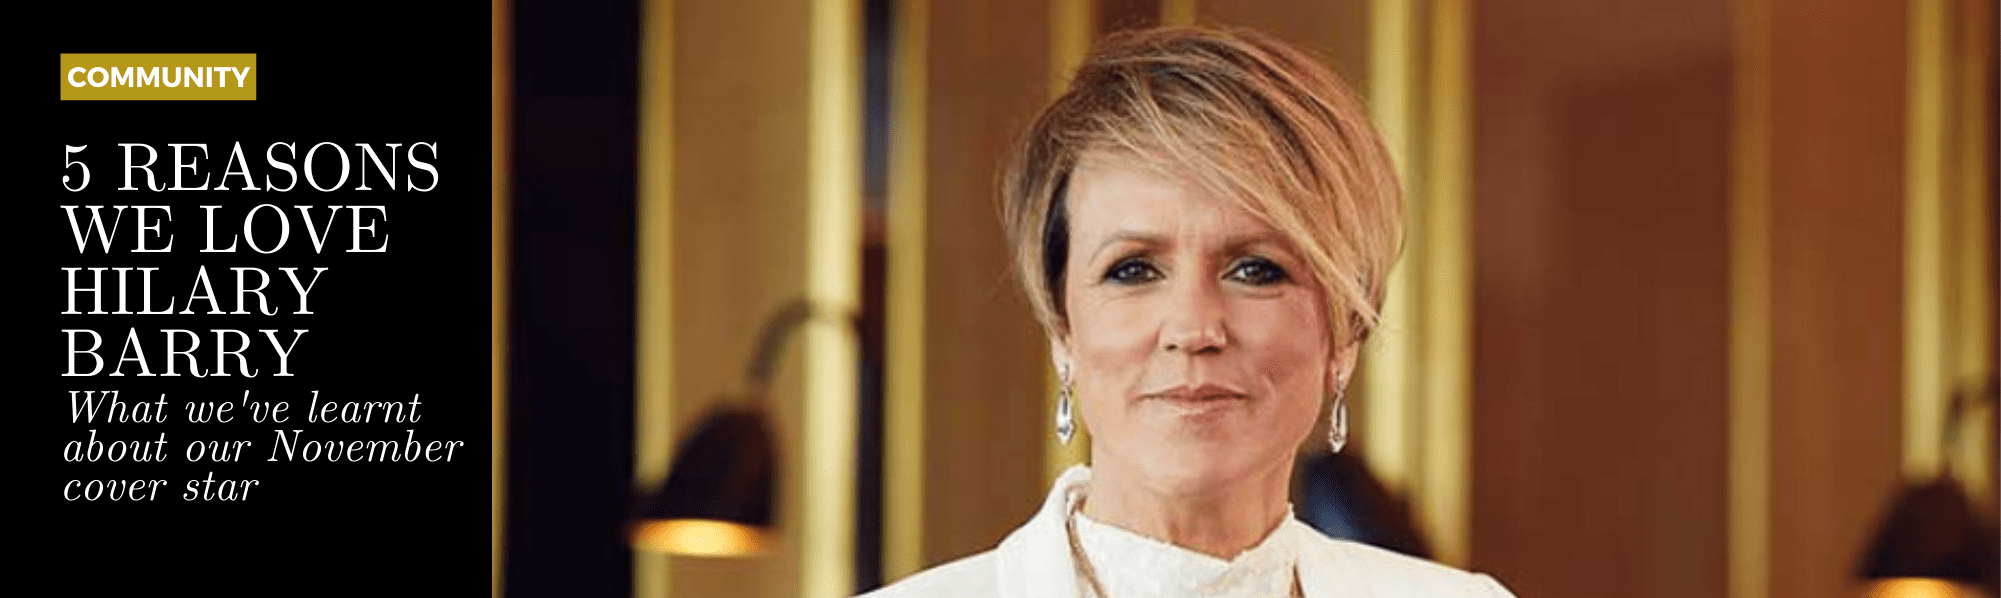 Hilary Barry on the politics of beauty and freedom of not giving a damn